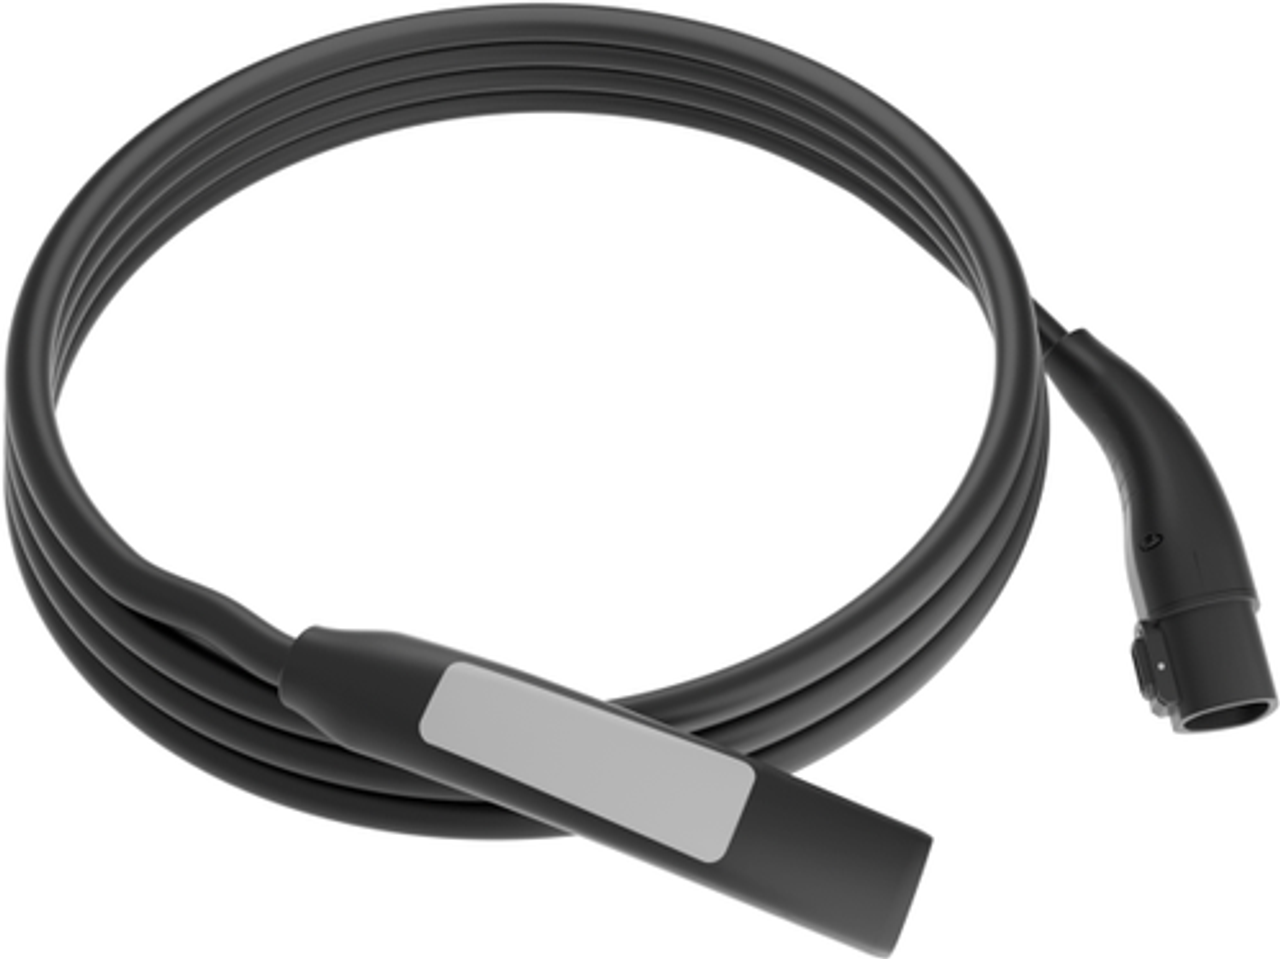 Rexing - Tesla Extension Charging Cable - 48A 20ft - Black